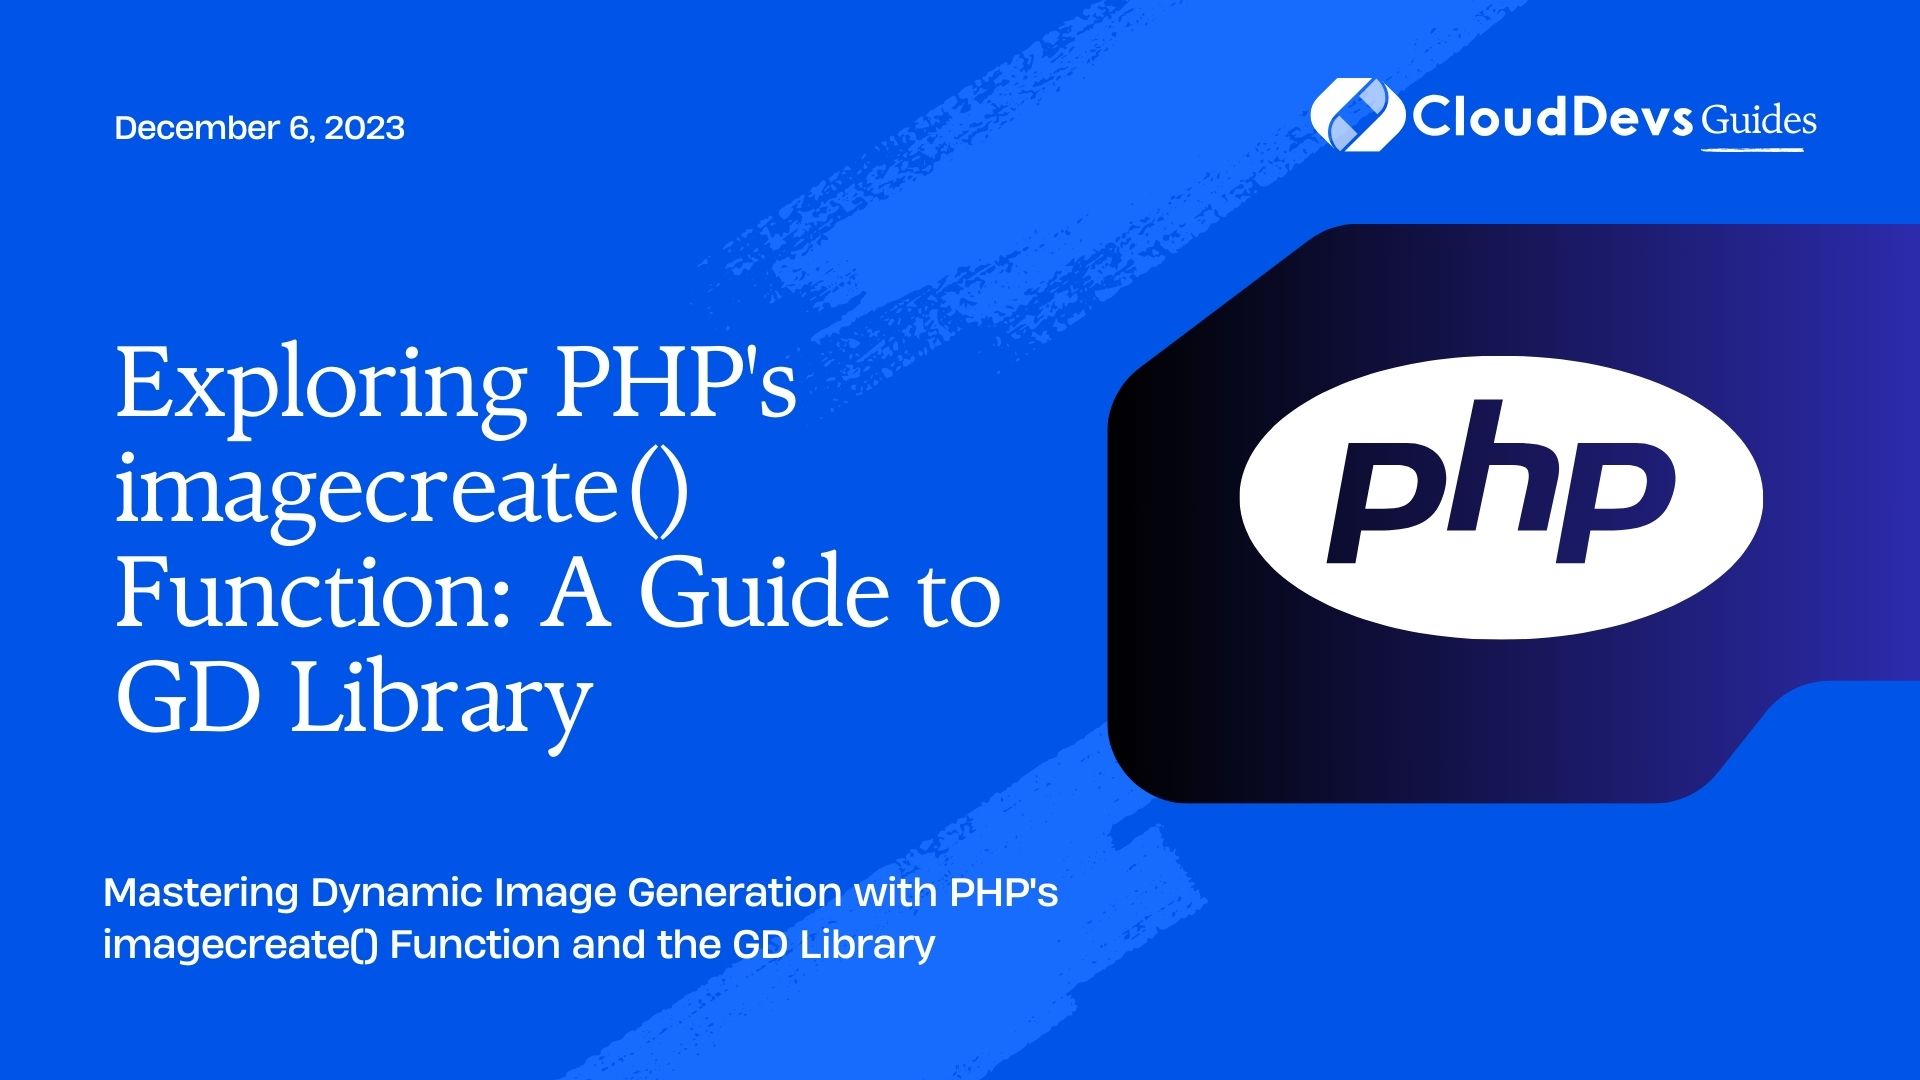 Exploring PHP's imagecreate() Function: A Guide to GD Library